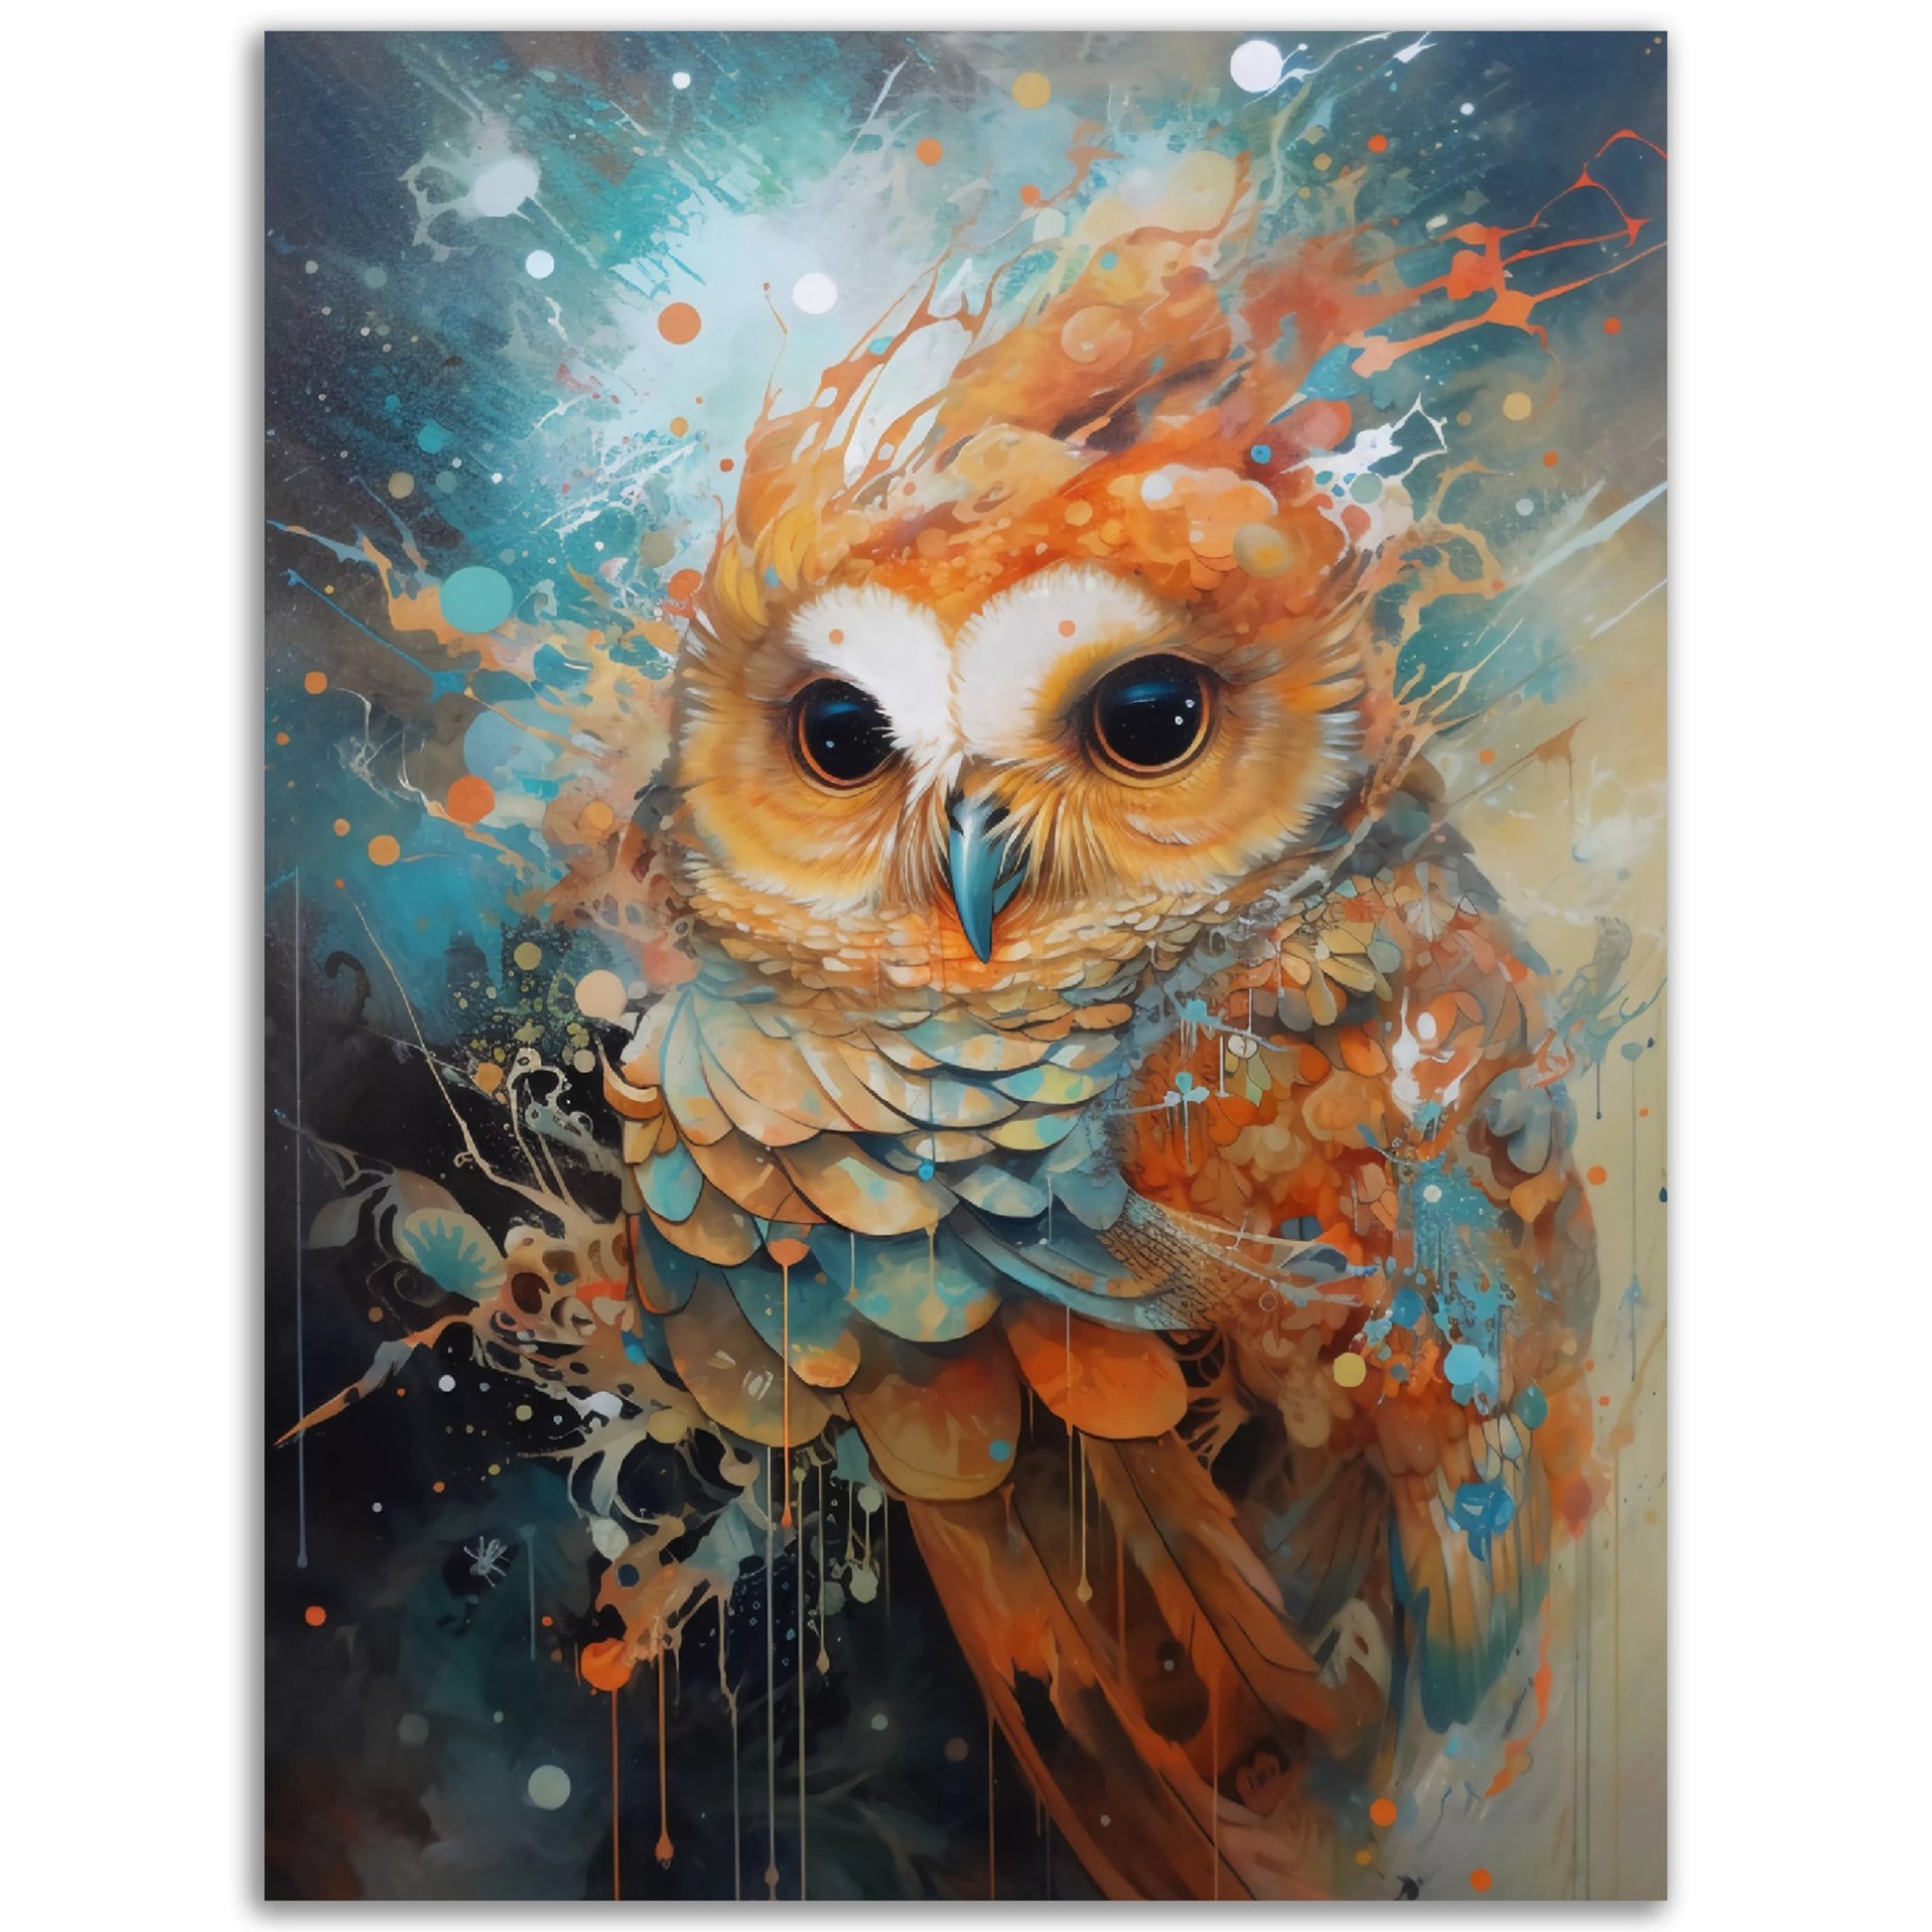 A Bird of Colour painting on canvas that would be a perfect addition to your wall art collection.